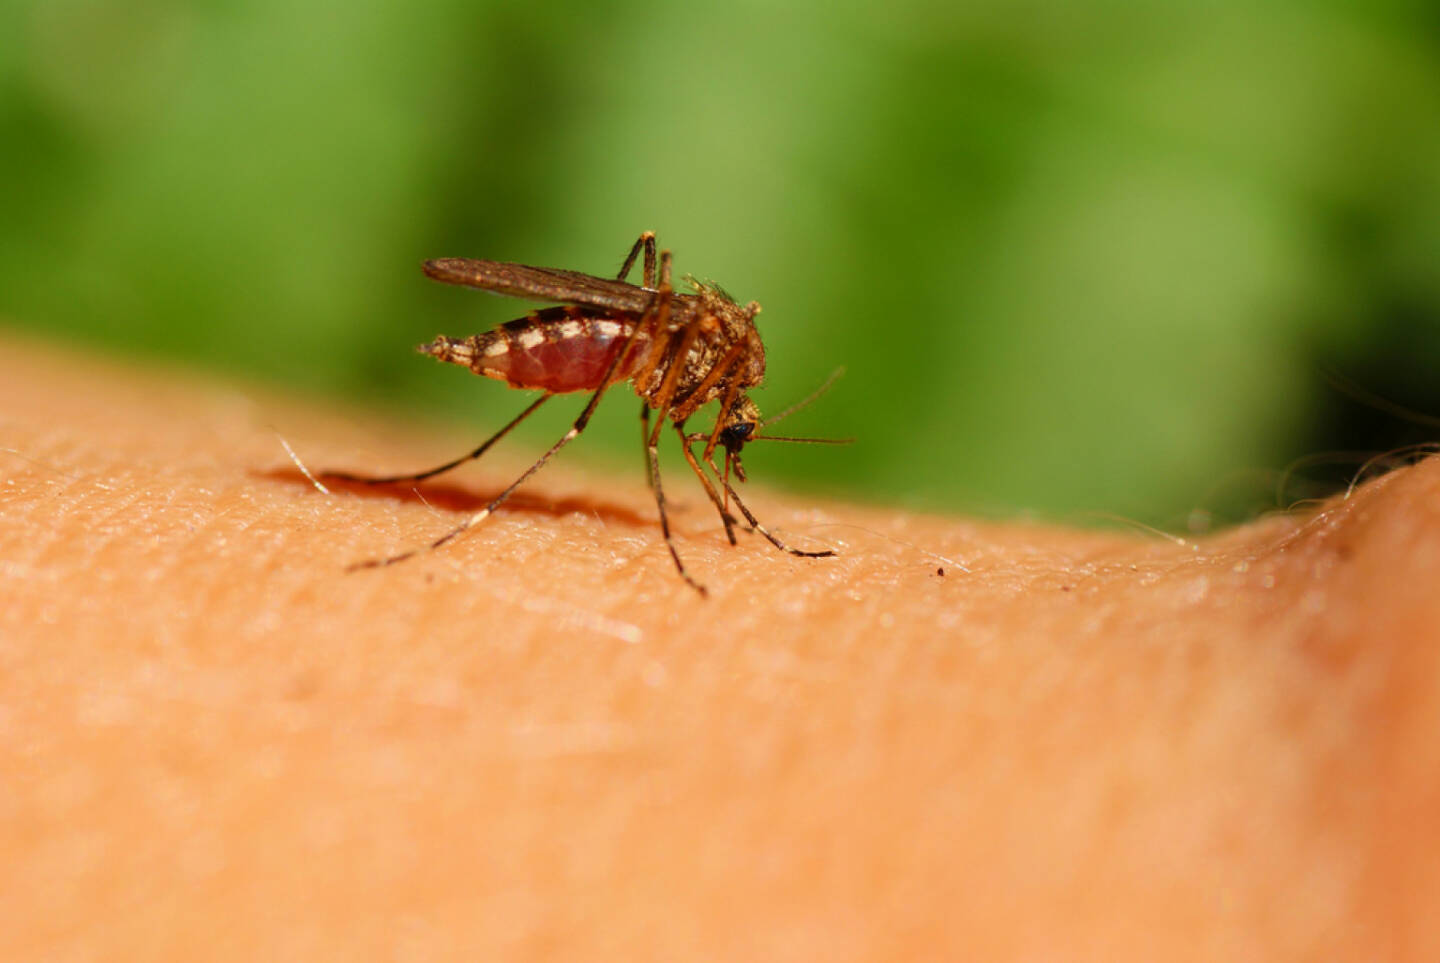 Mücke, Gelse, Blut, Blutsauger, Mosquito, http://www.shutterstock.com/de/pic-34944307/stock-photo-mosquito-drinks-human-blood-on-green-background.html 